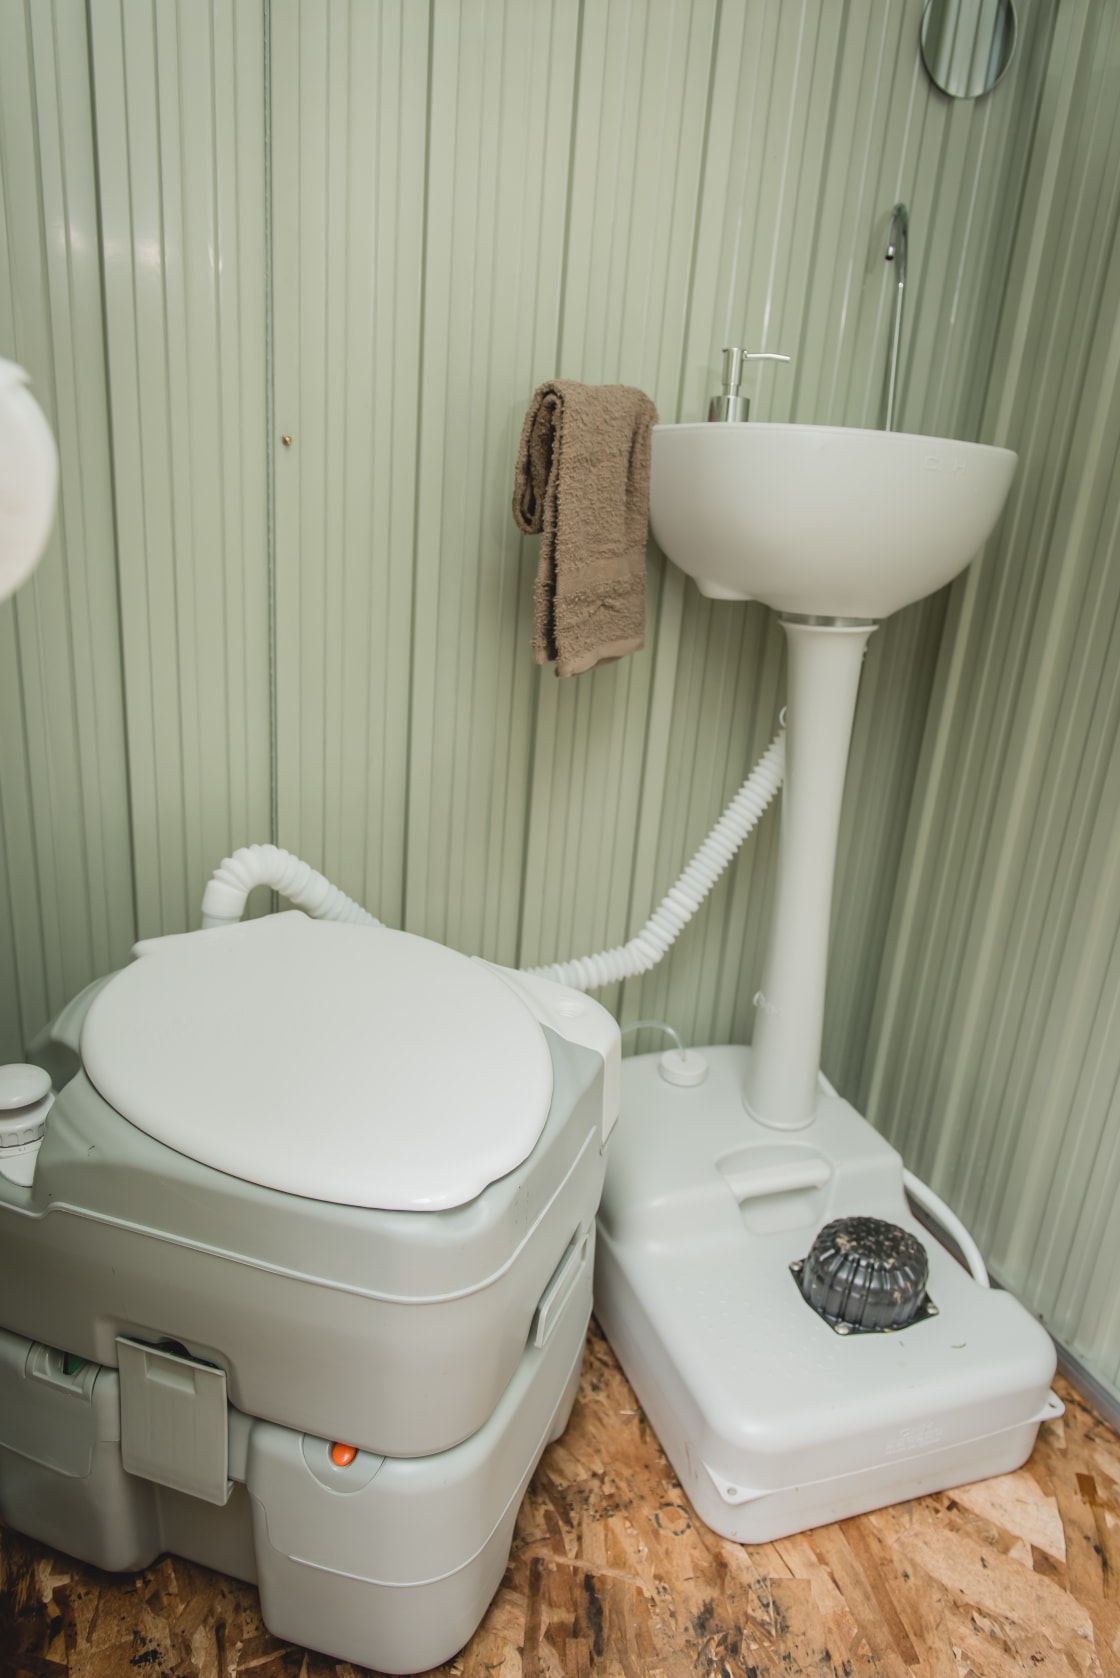 Inside bathroom - compostable toilet & pumping sink. 

Photo provided by @kaitmckayphotography